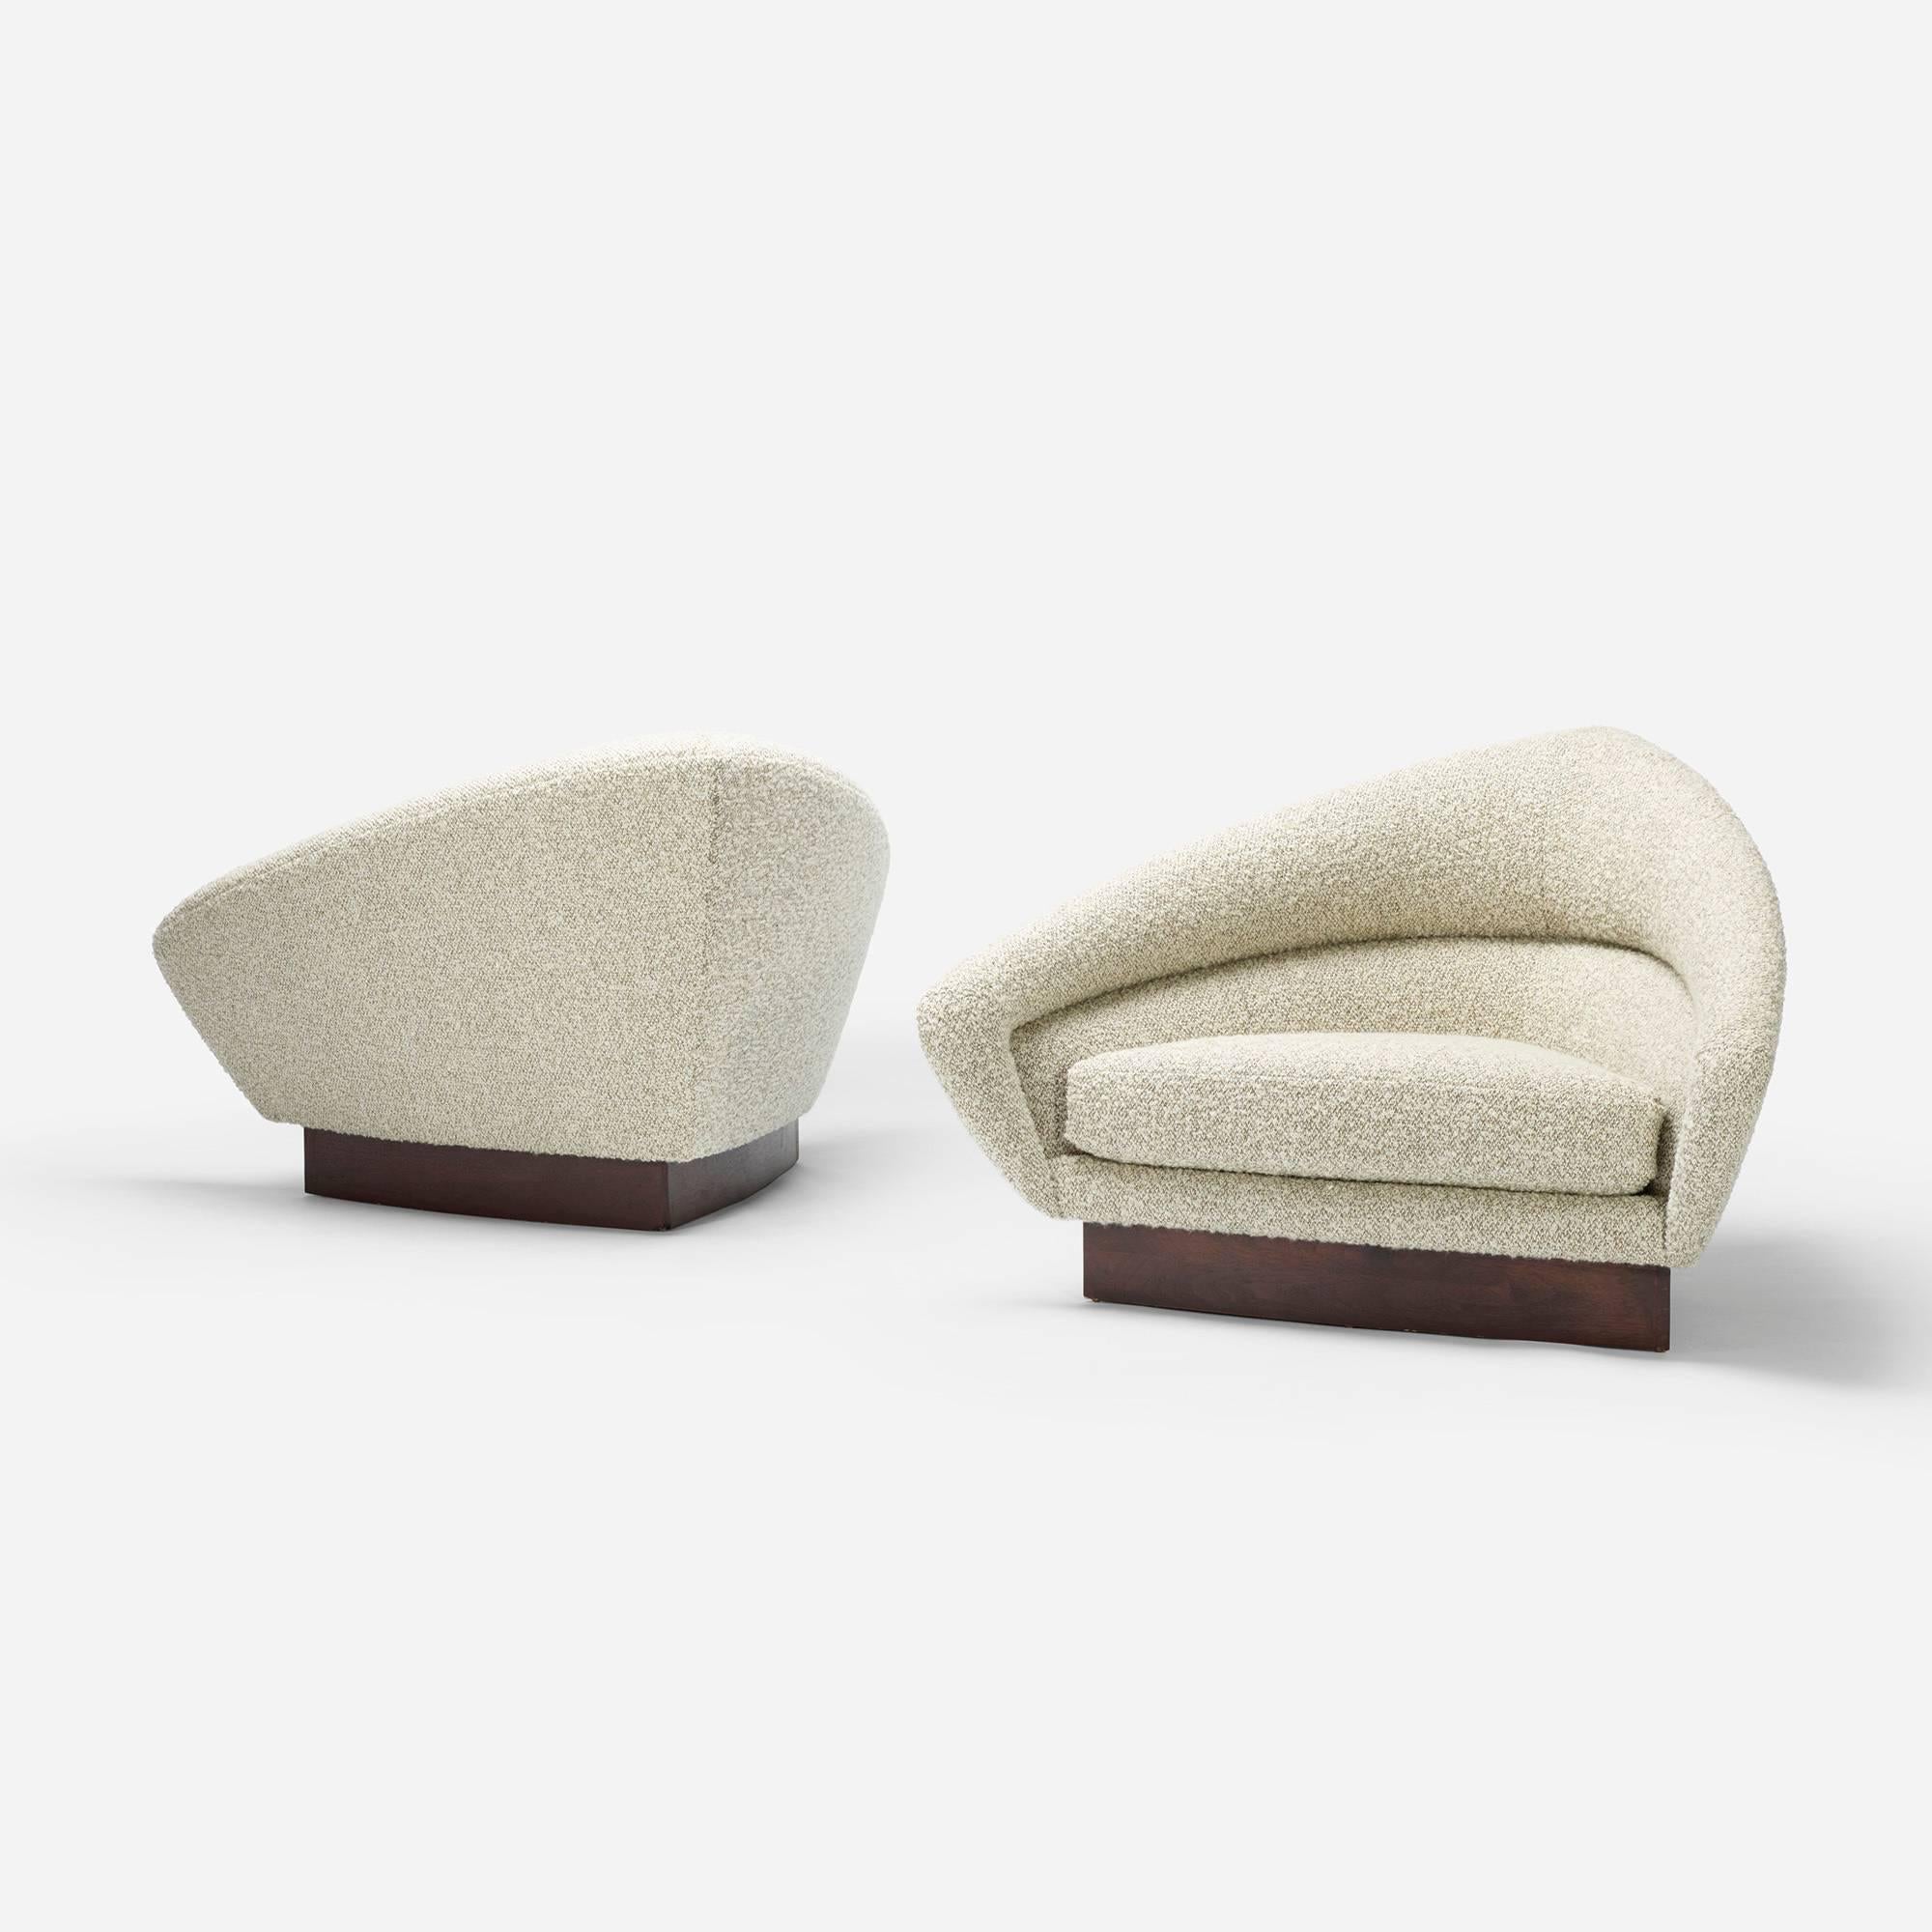 These V-shaped, low slung lounge chairs were recently reformed and recovered in a plush, sweater-like material giving them an incredibly cozy but sophisticated allure.